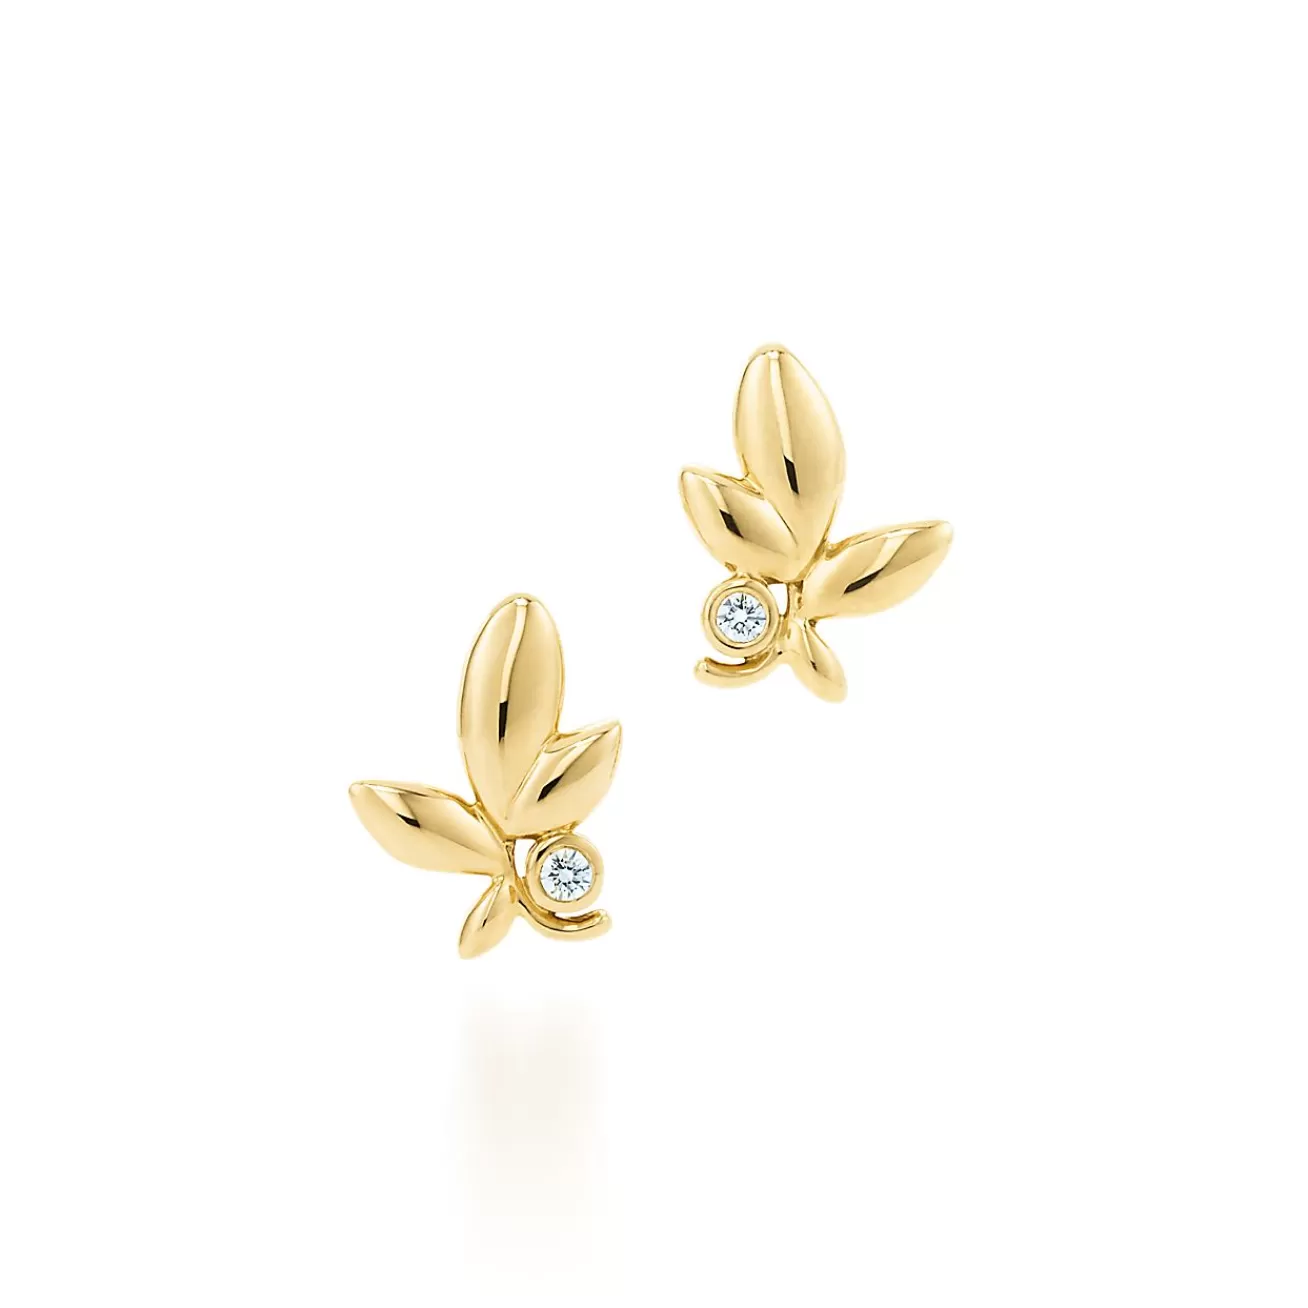 Tiffany & Co. Paloma Picasso® Olive Leaf earrings in 18k gold with diamonds. | ^ Earrings | Gifts for Her